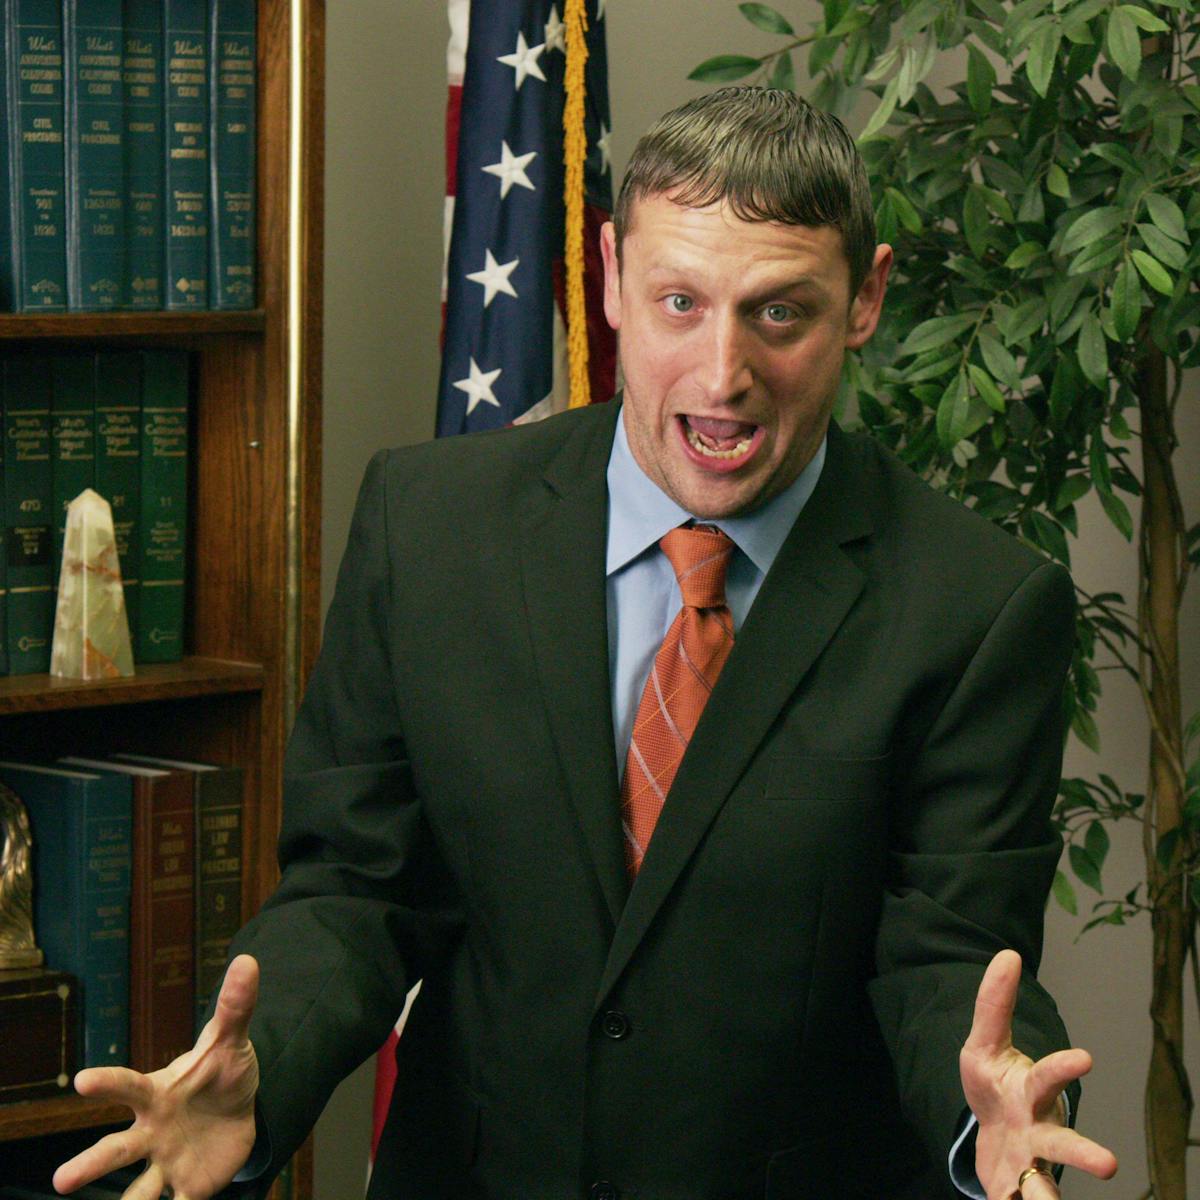 Tim Robinson wears a black suit jacket, blue shirt, and red tie. Behind him is an American flag, plant, and some very legal looking books.